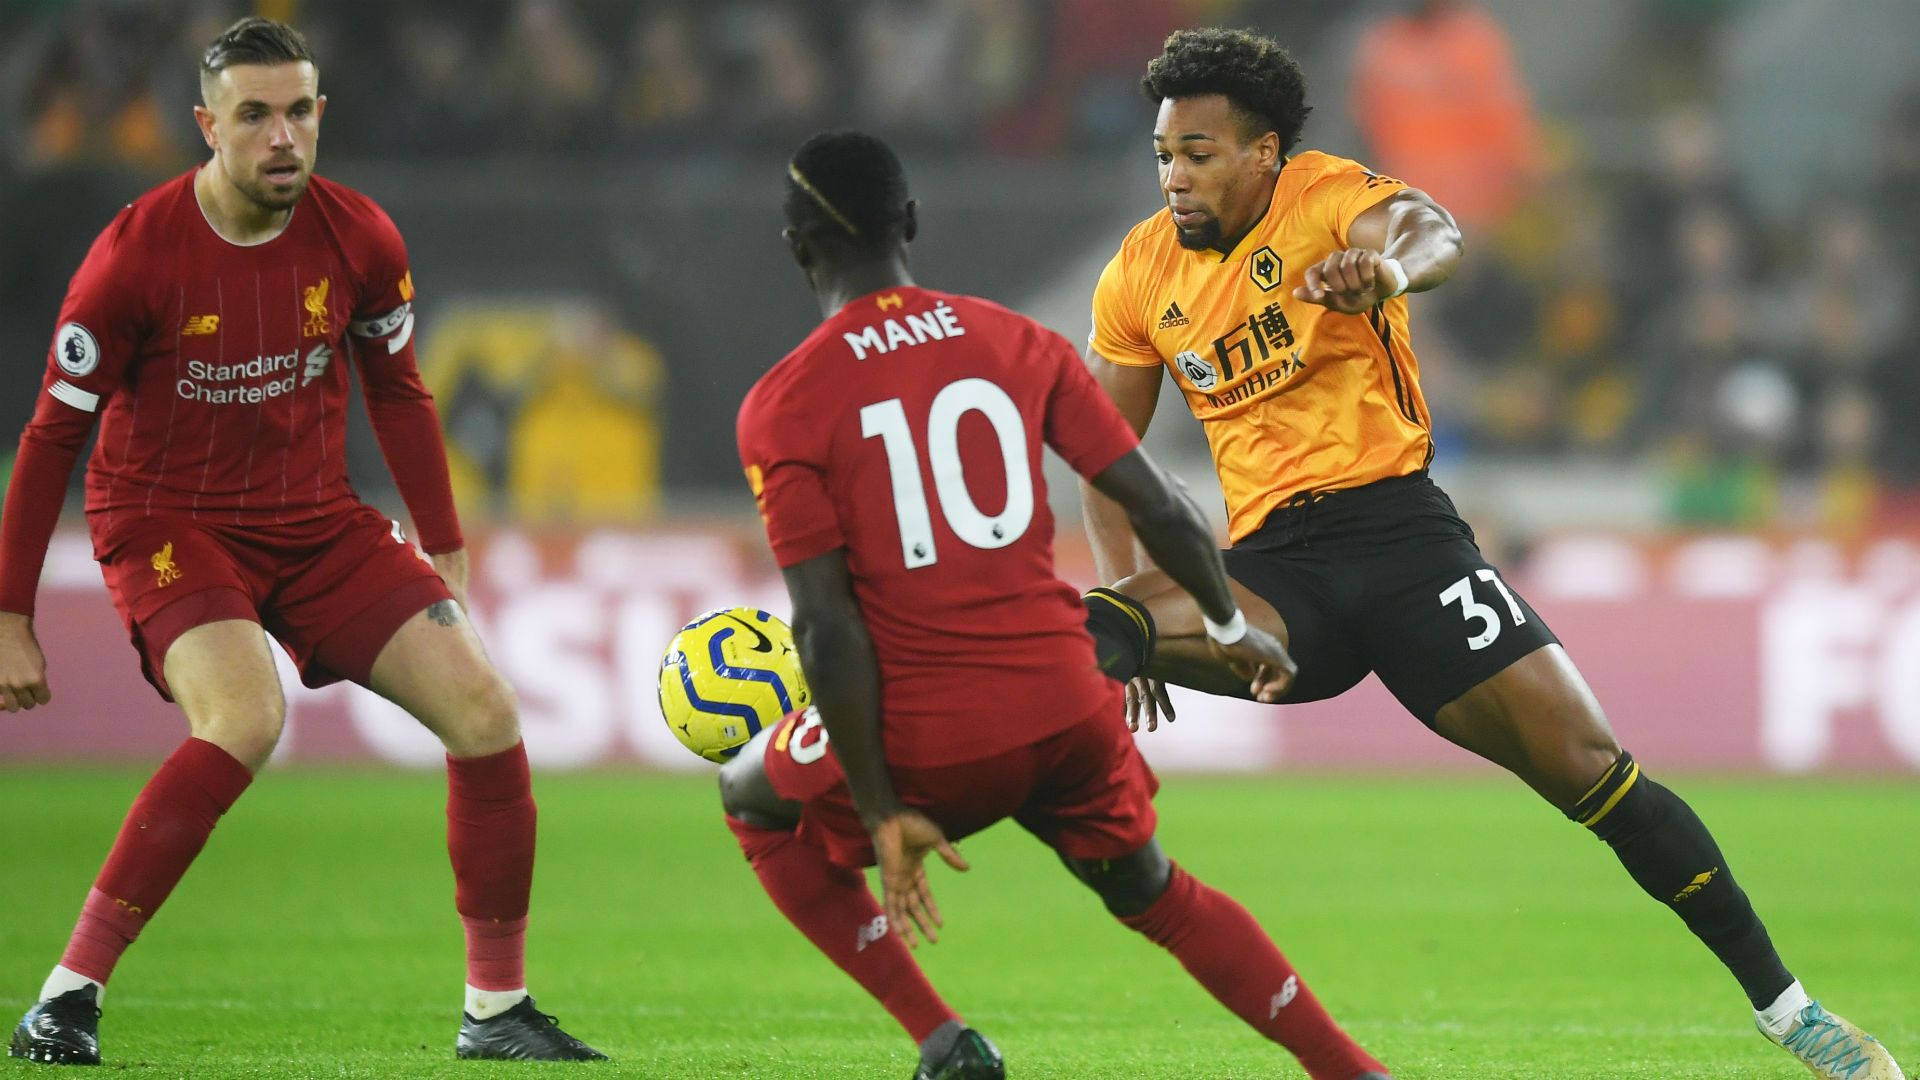 There is more to come from Wolves' Adama Traore'